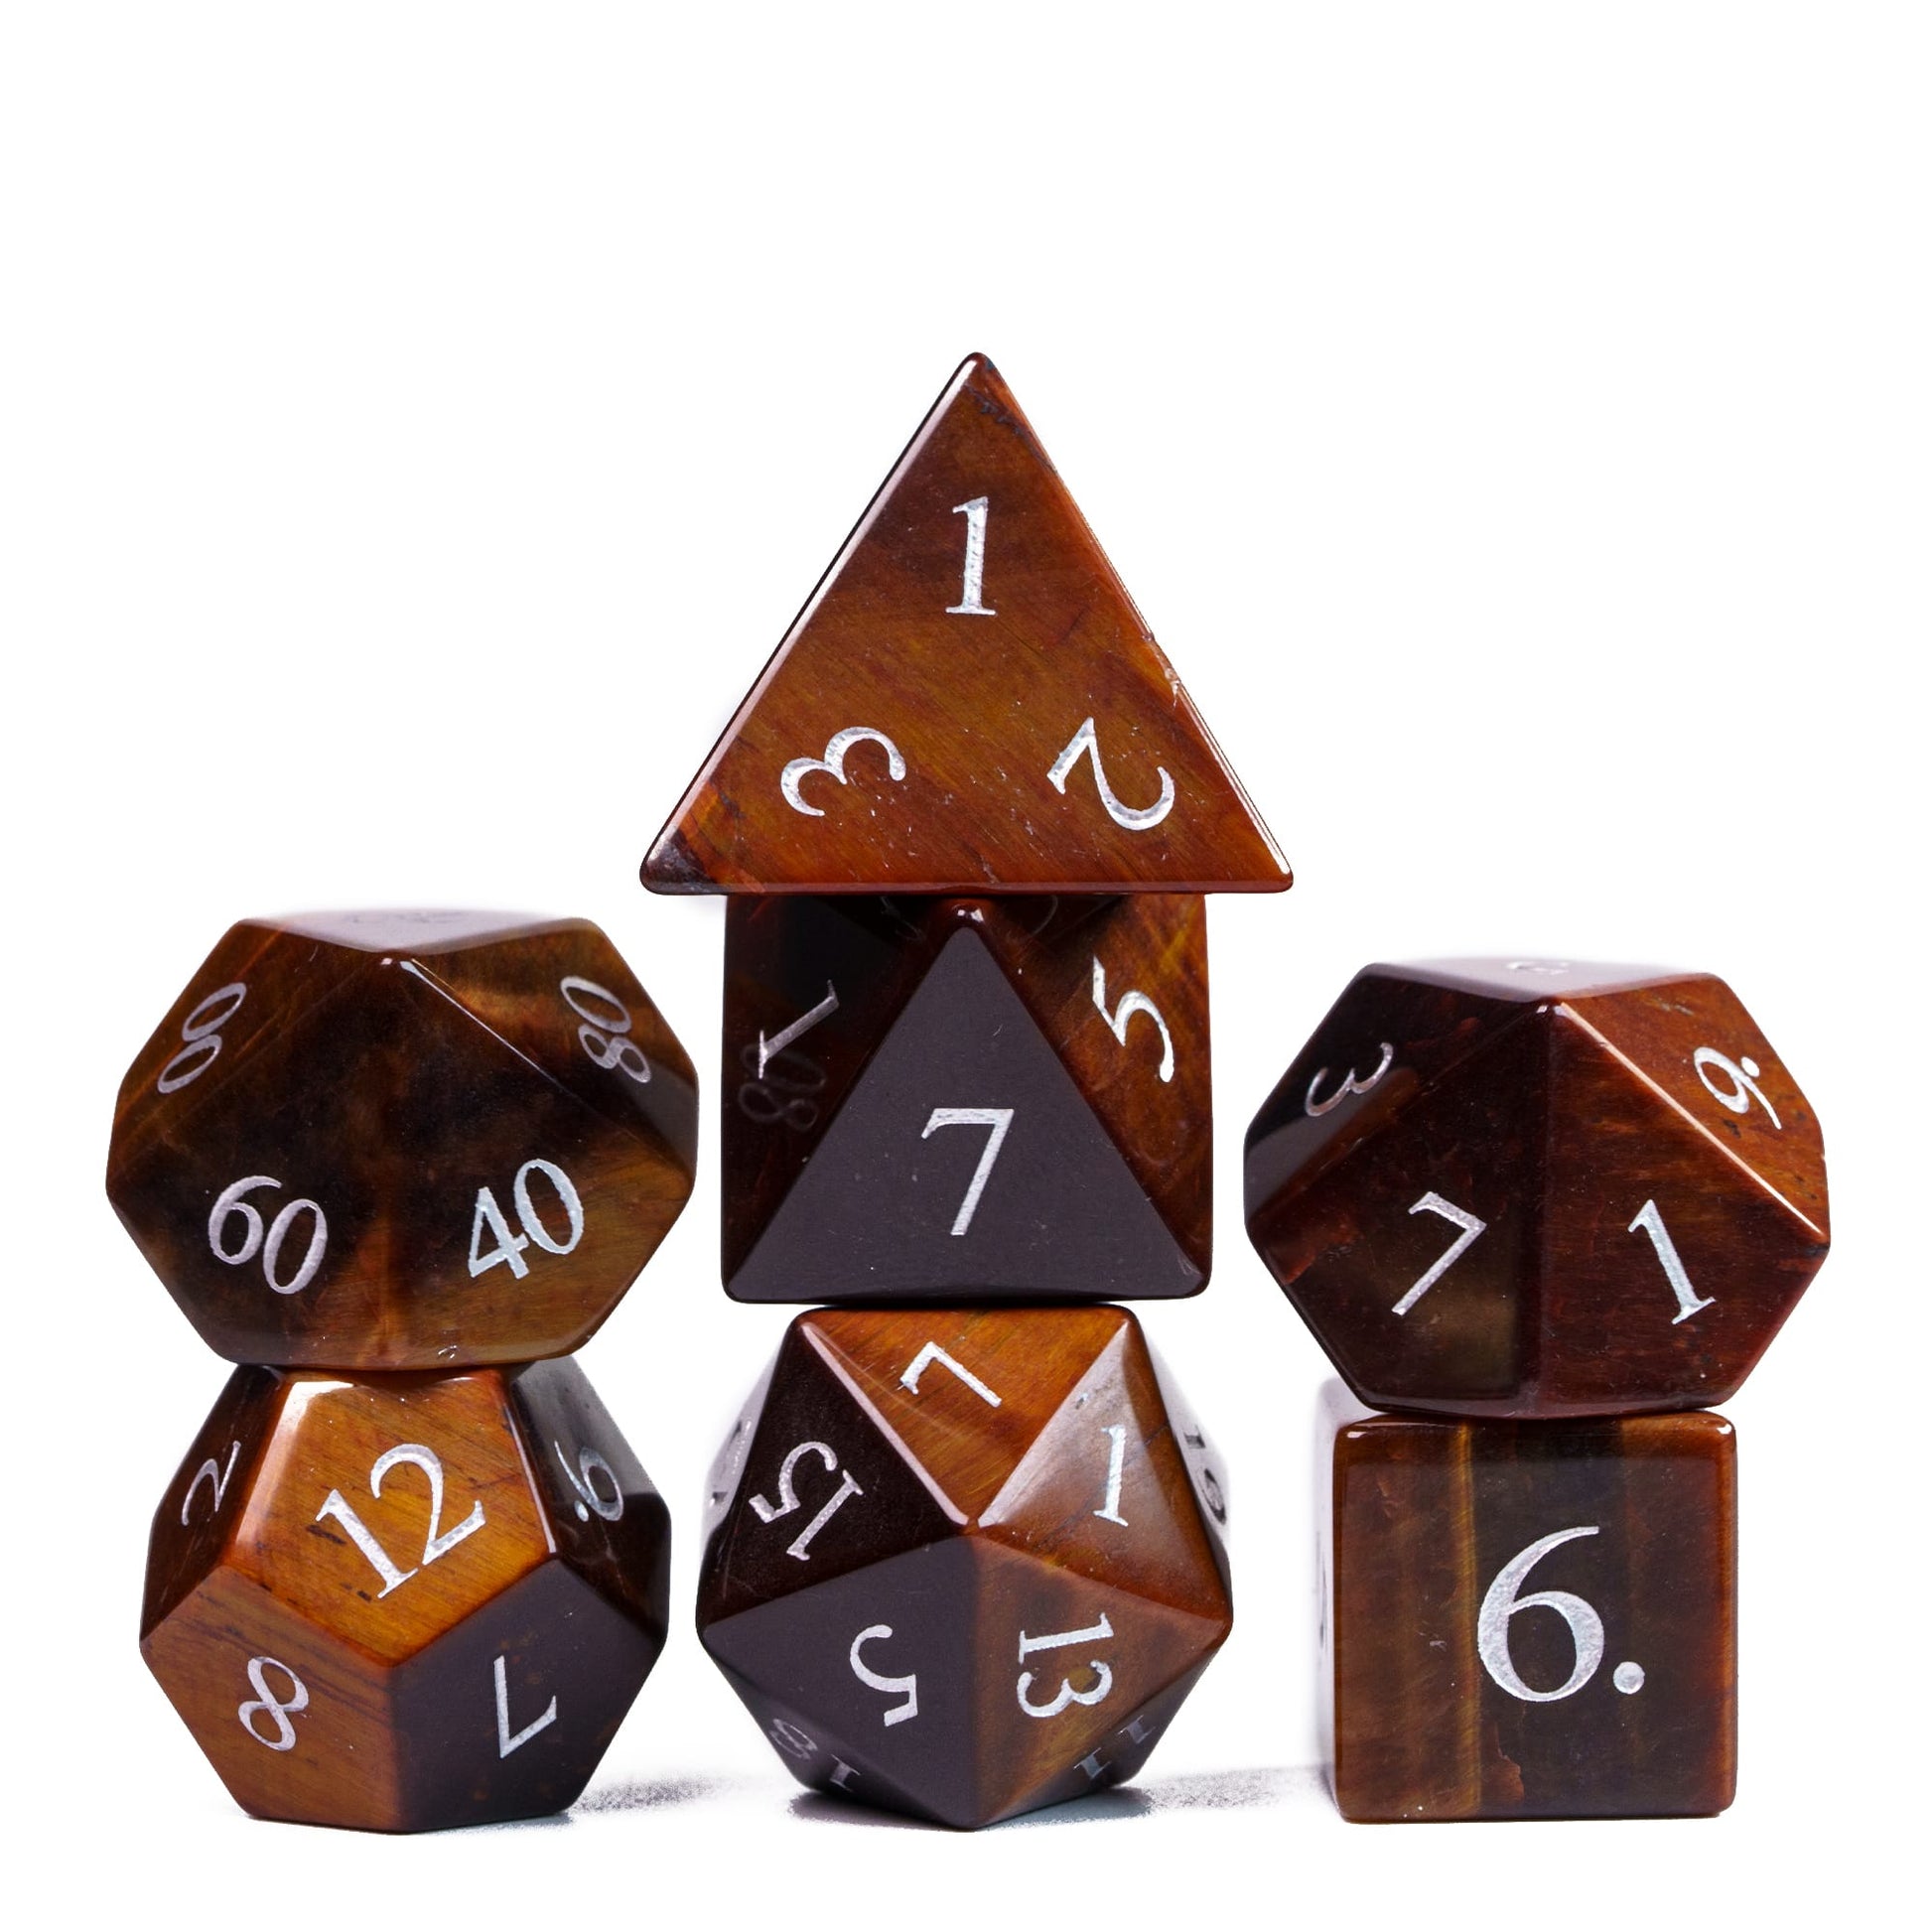 Dark variation colored stacked stone dice set